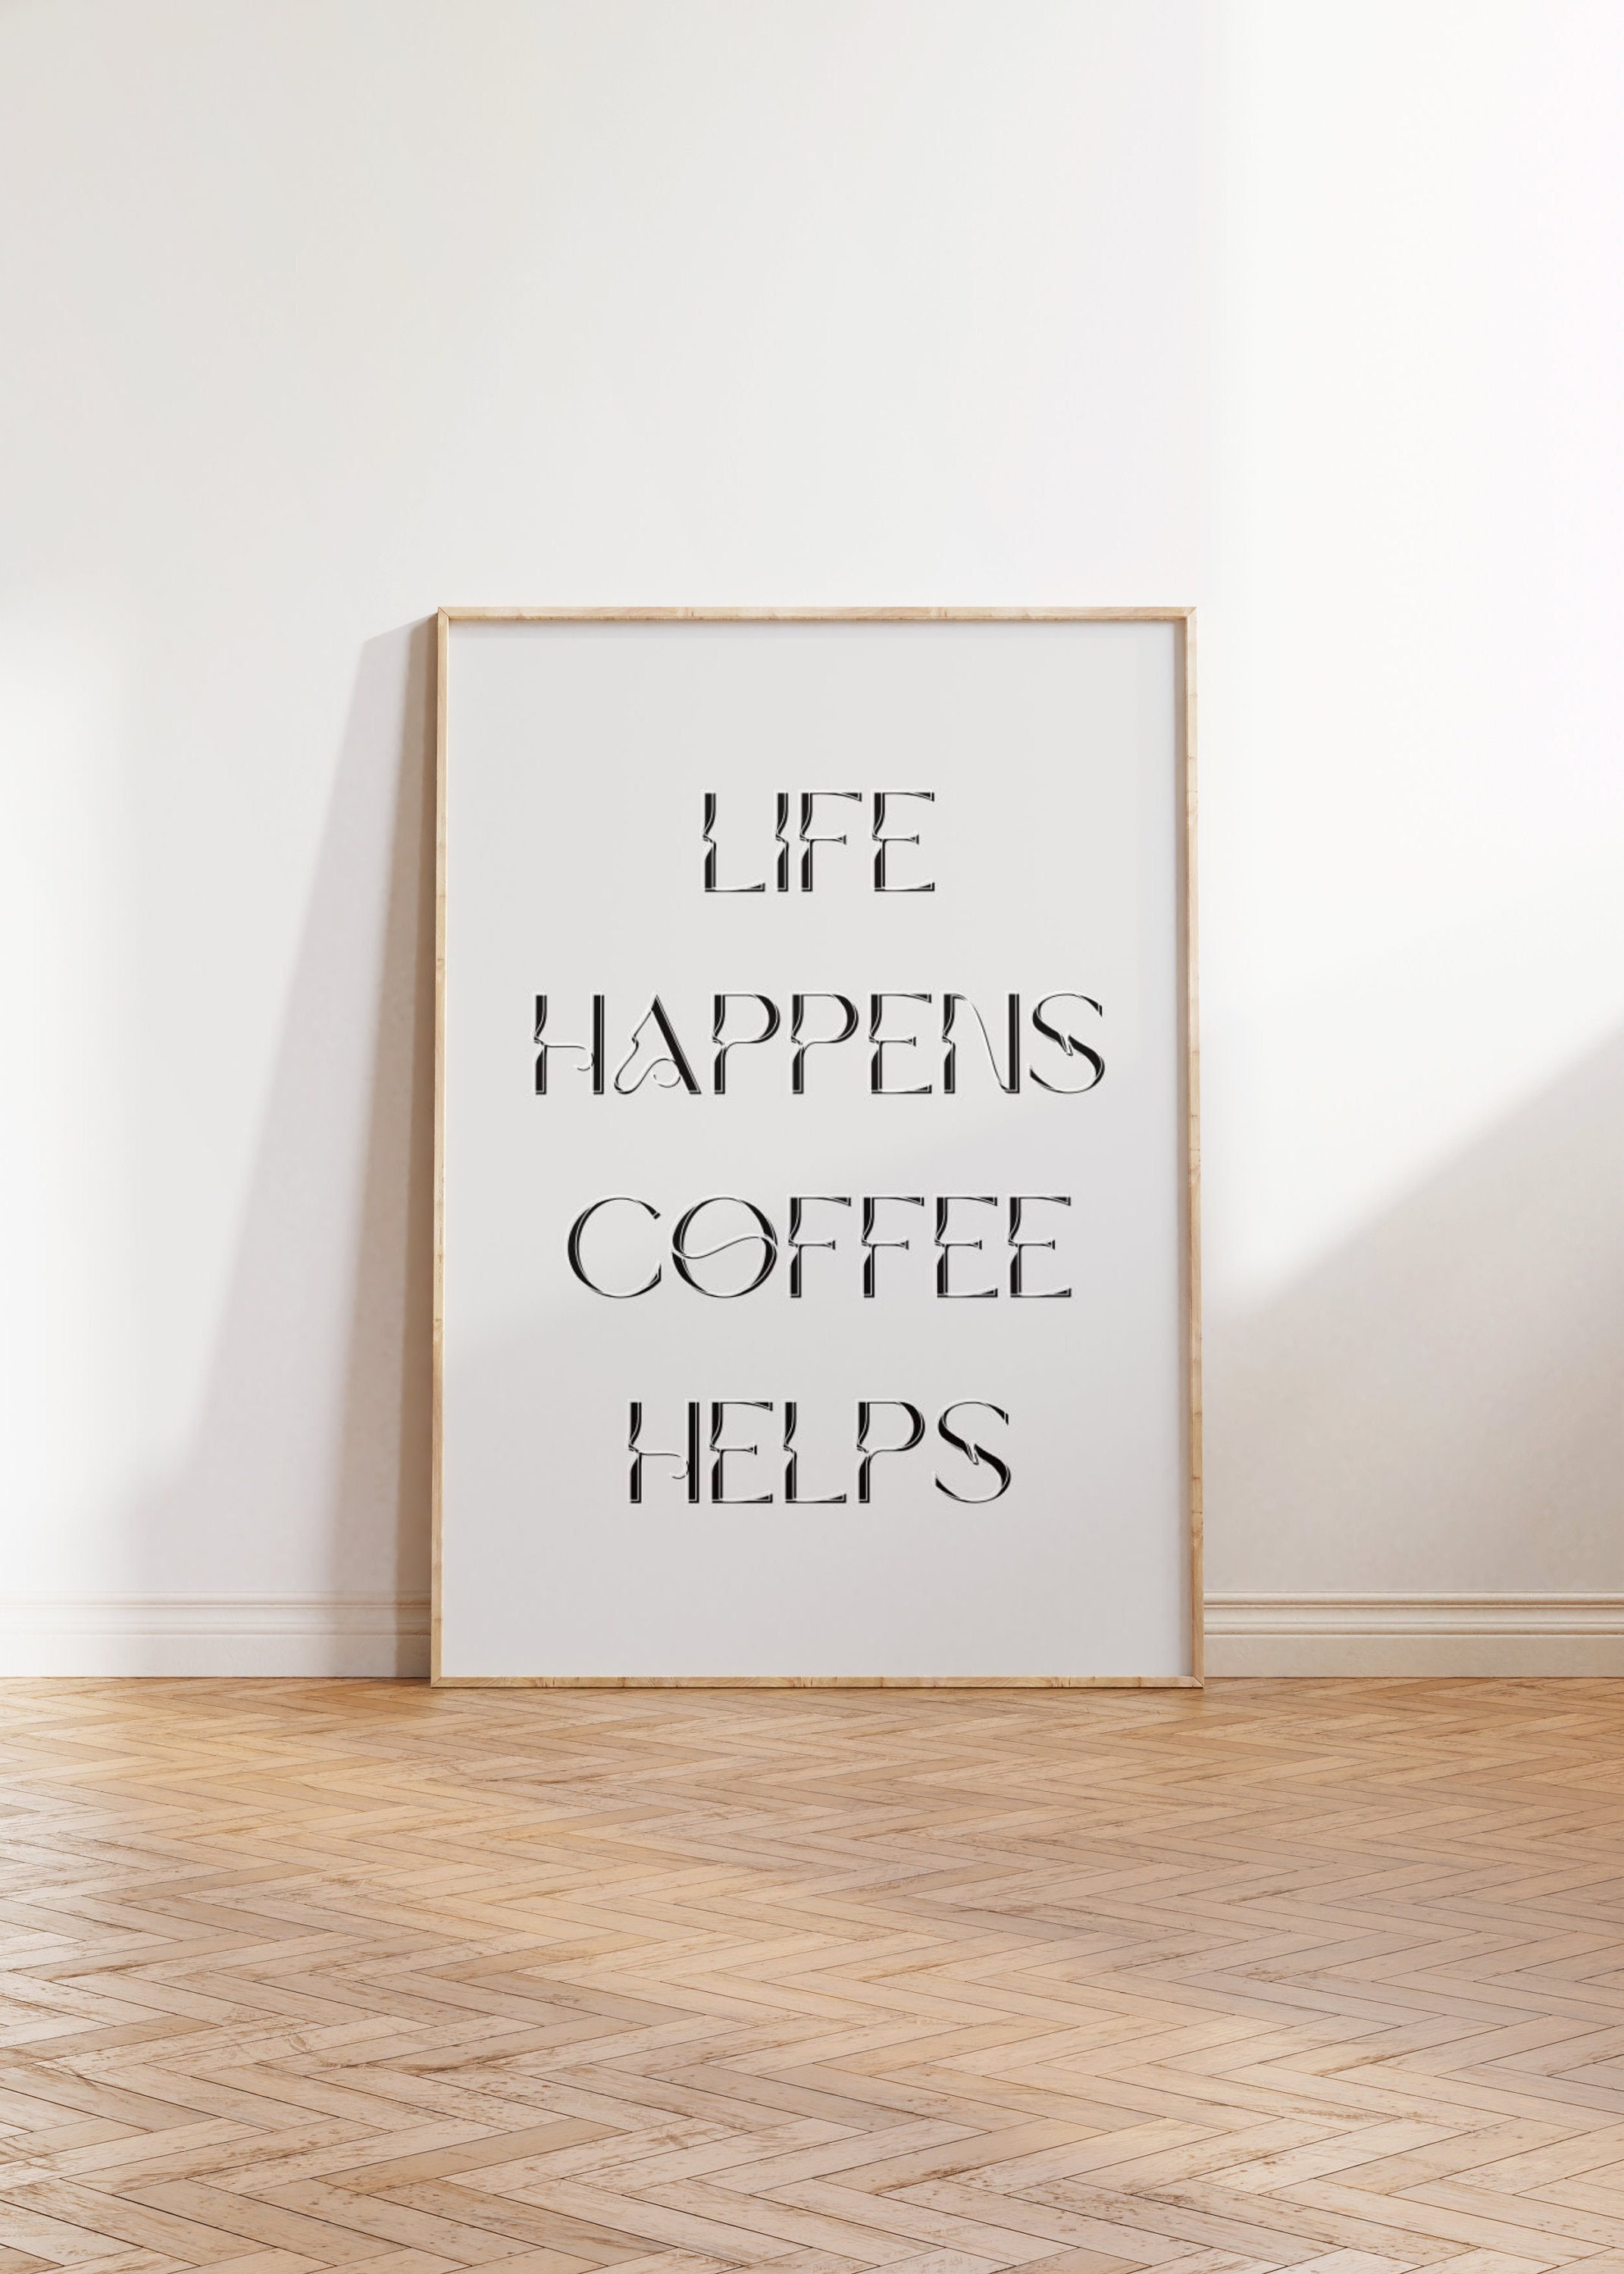 Coffee Minimalist Trendy Deco Poster, Life Wall Cool Fancy Room Etsy Chic Quote Calm Download, Digital Helps Art, - Happens Print, Quote Cozy